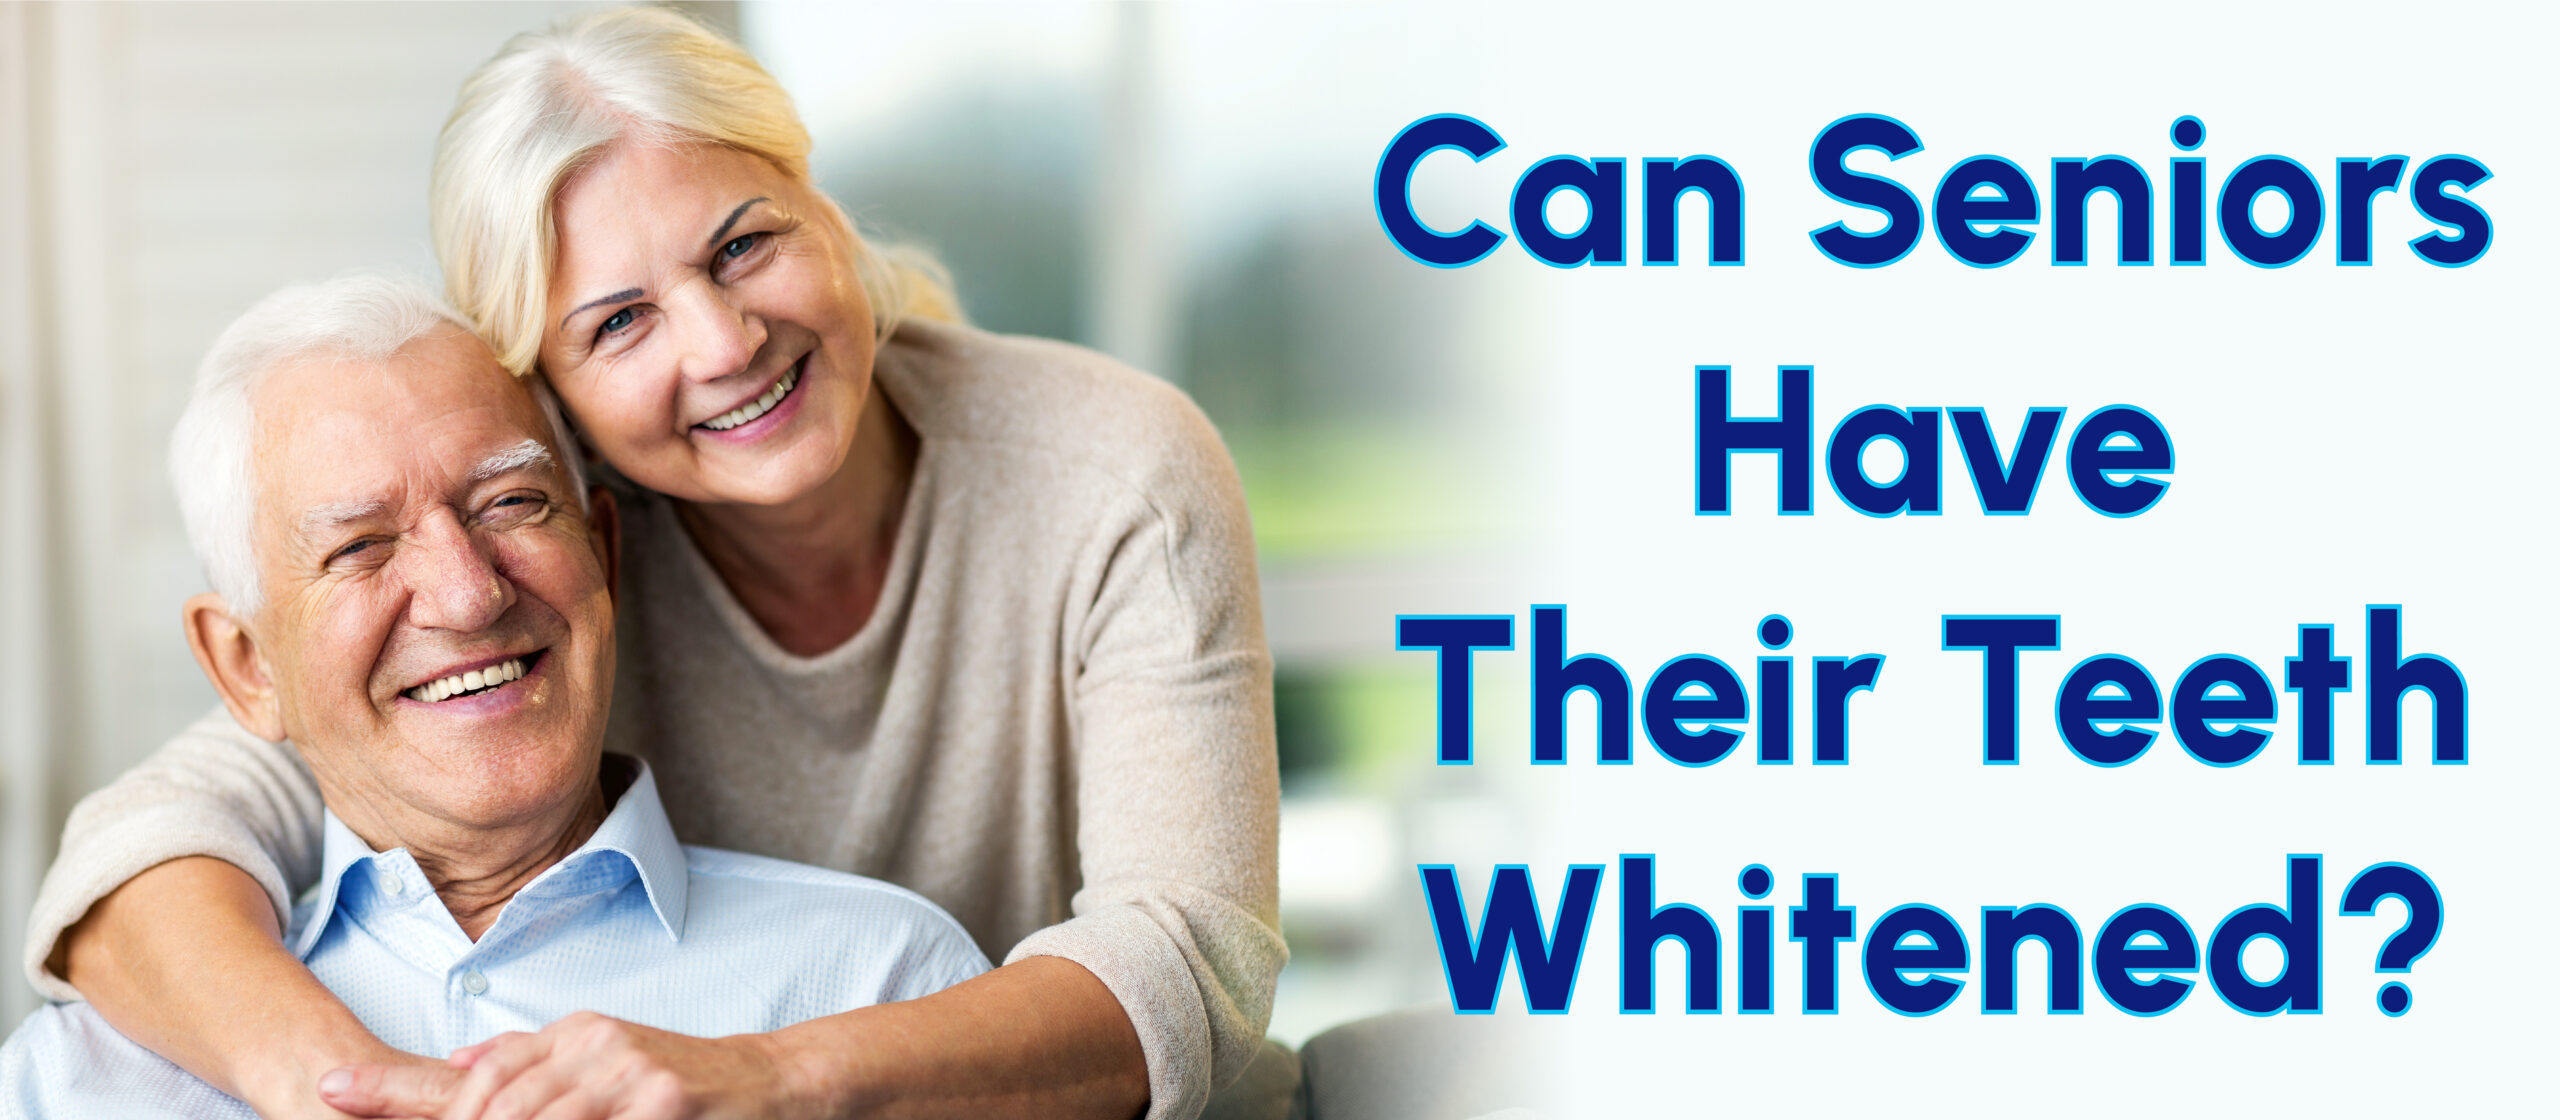 Can seniors have their teeth whitened banner image